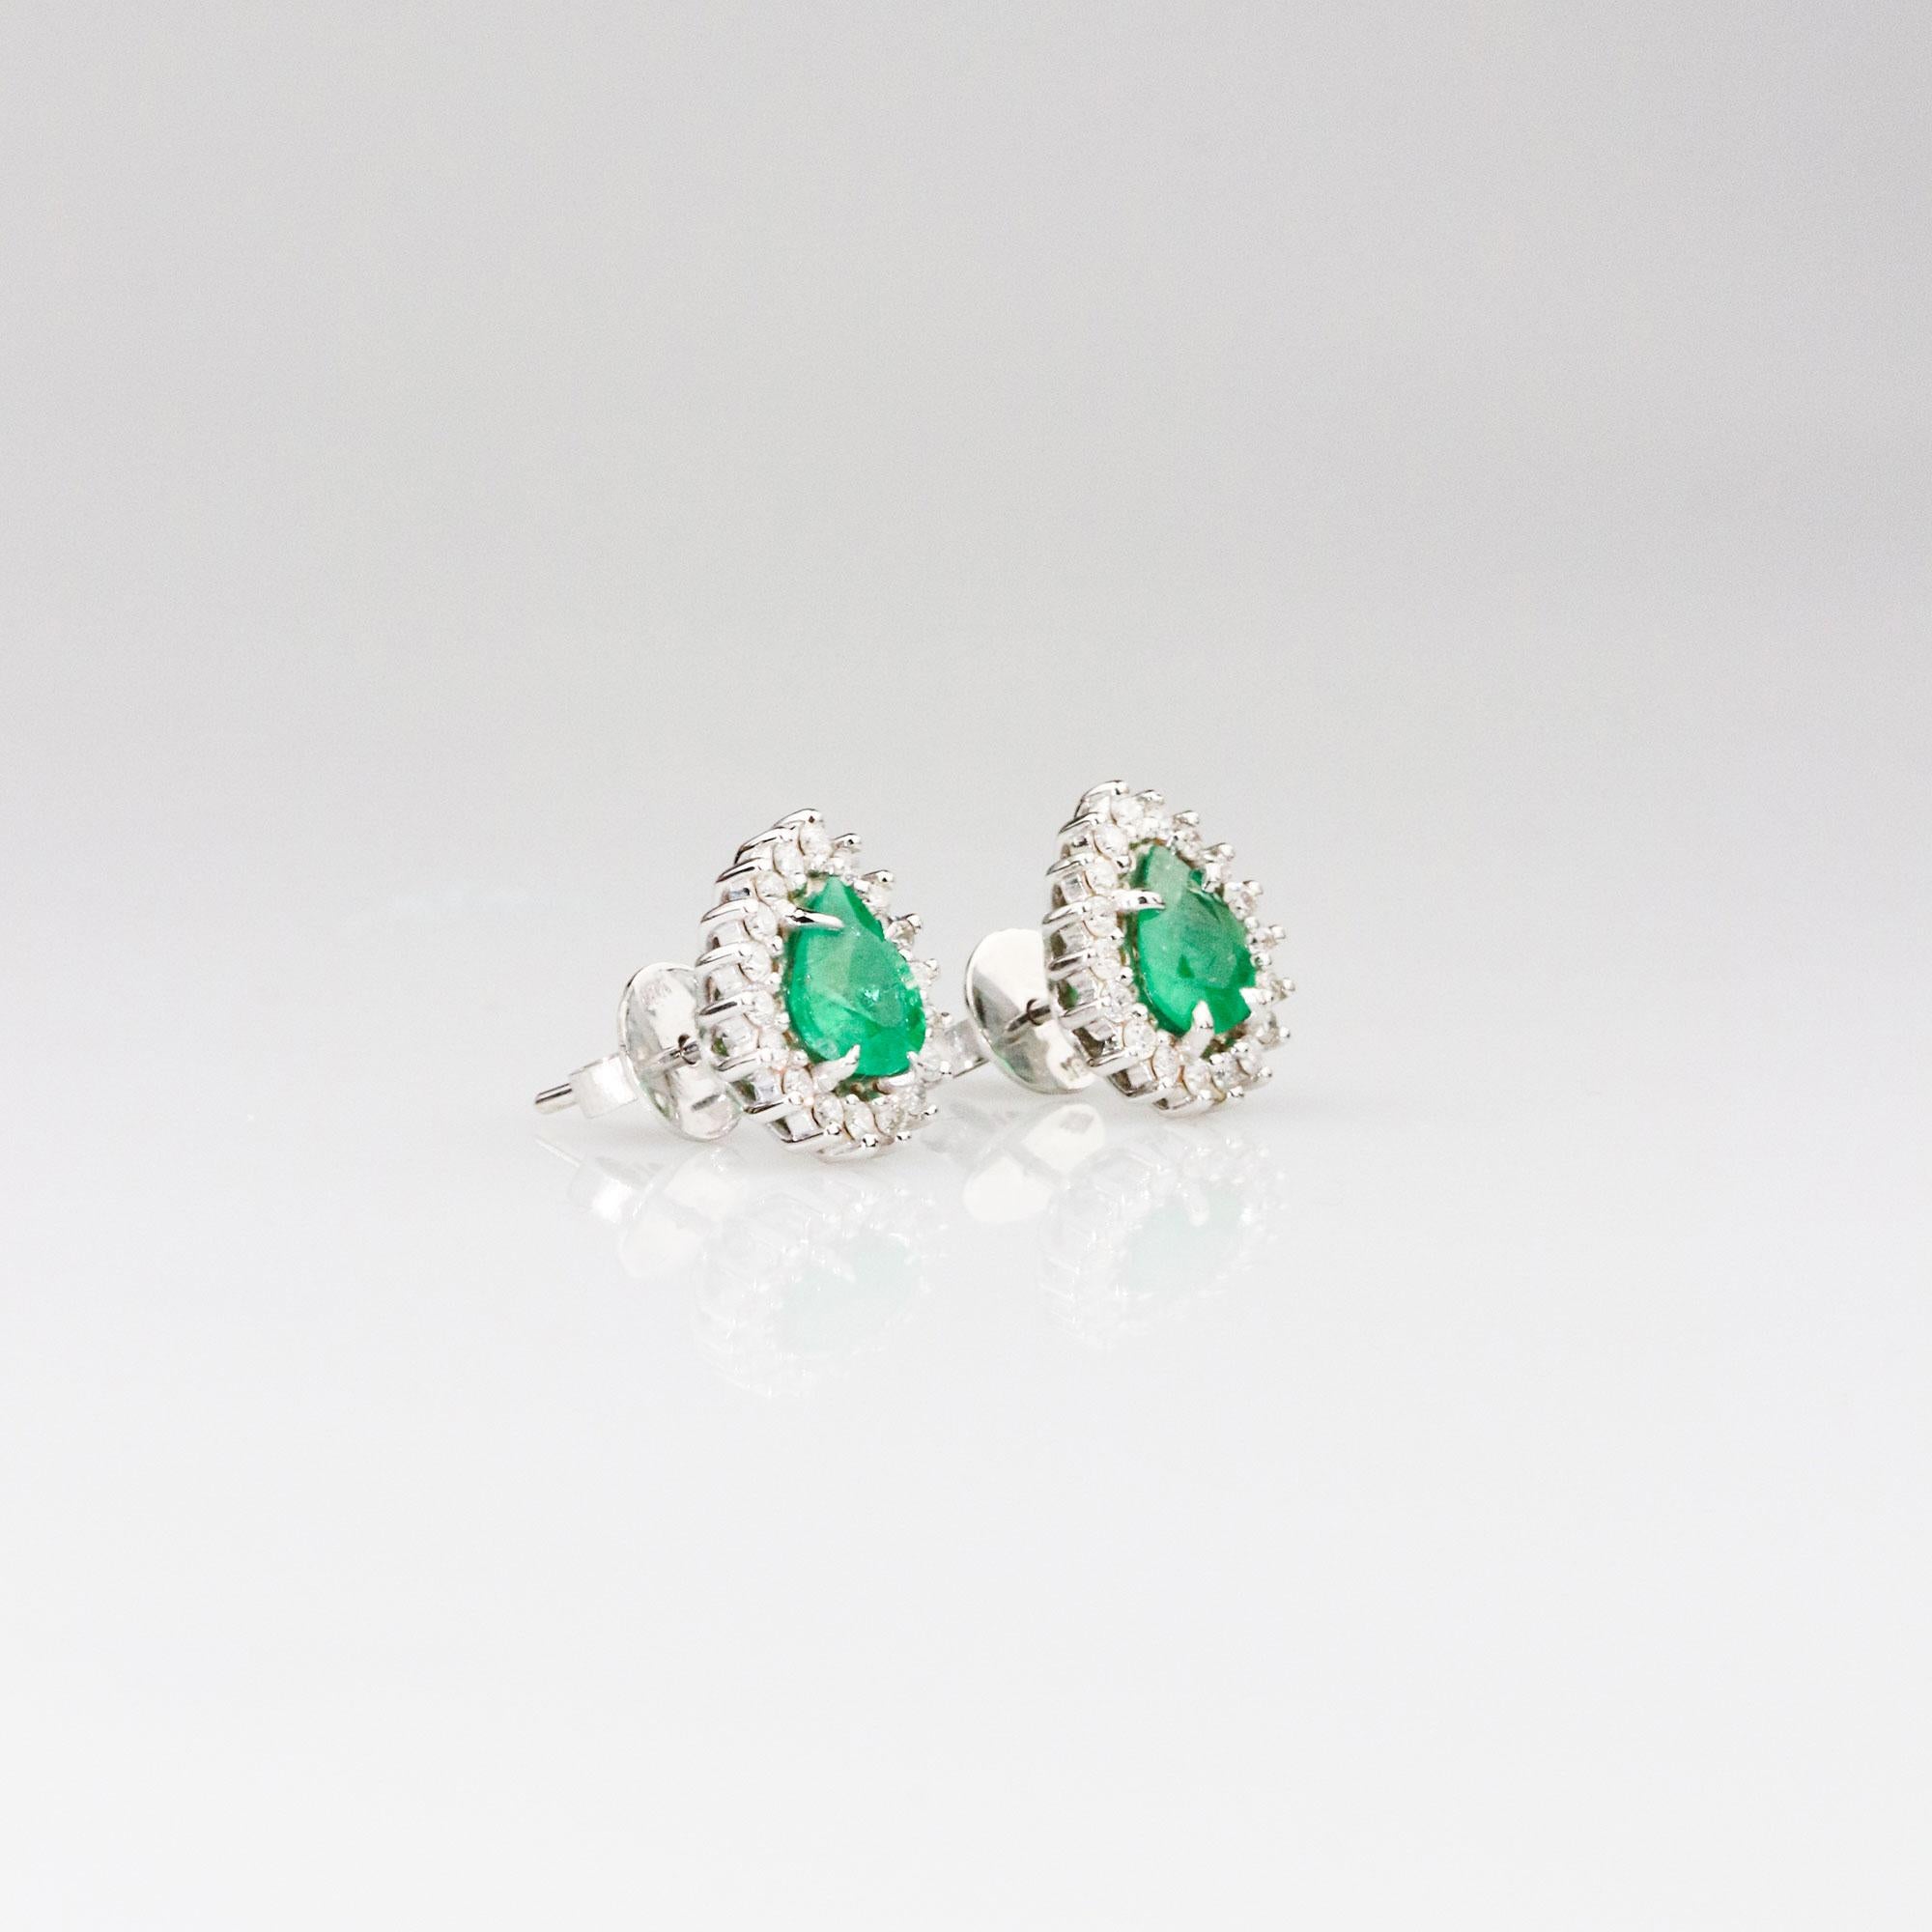 18K Solid White Gold

Emerald Gemstones: Pear Shape, Size 7.6x6.4mm, Weight 1.69 cts

Natural Diamonds: Round Cut

People have admired emerald’s green for thousands of years. Today the majority of Emeralds are found in Brazil, Colombia and Zambia.